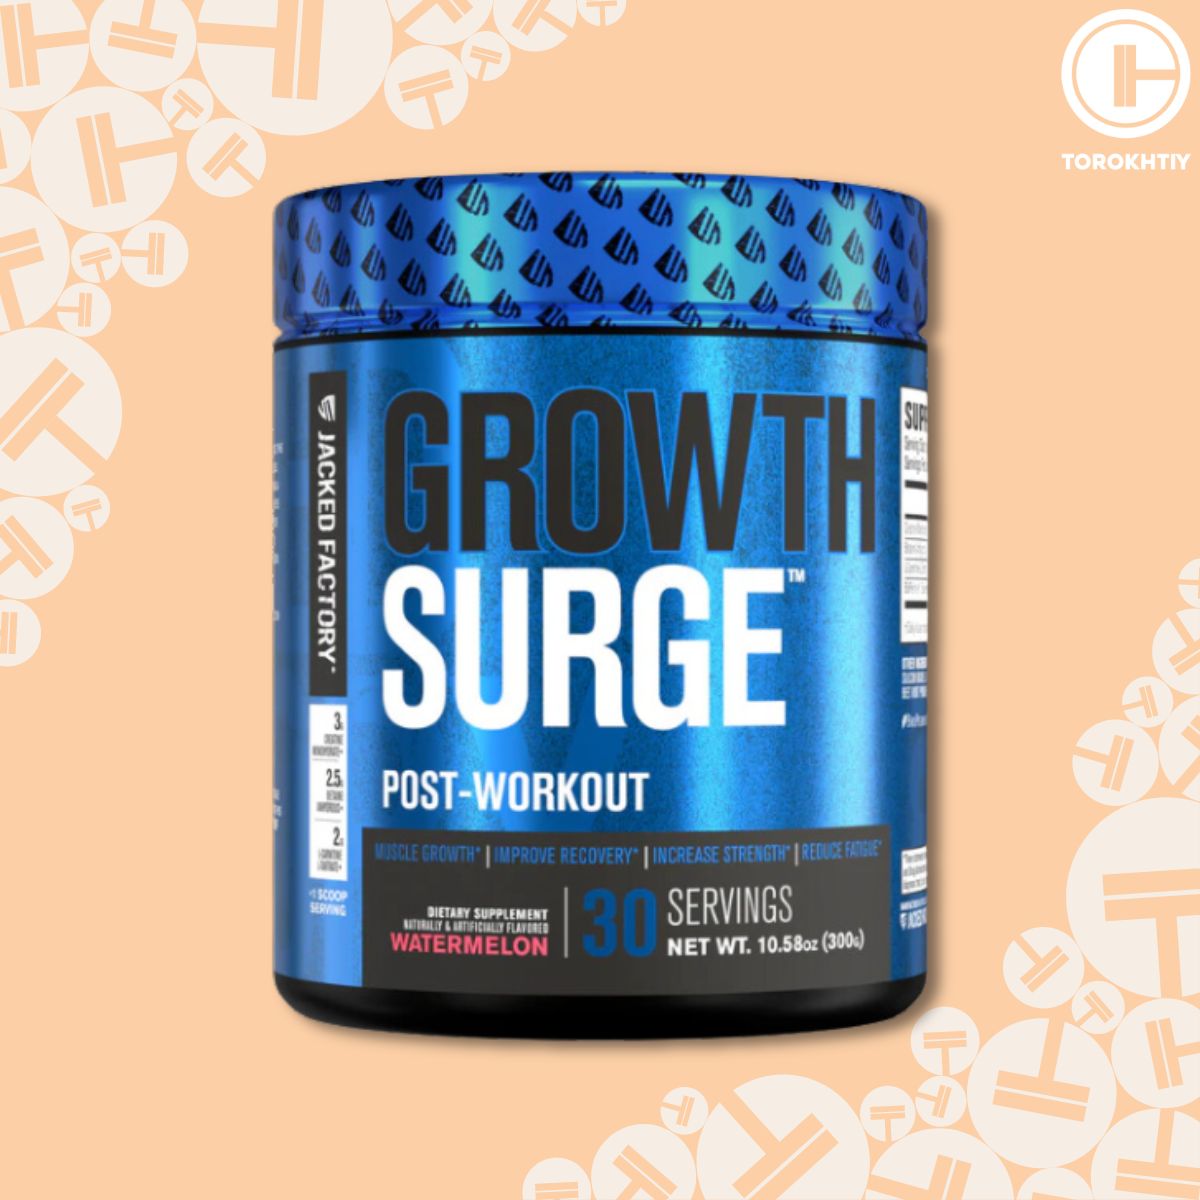 Jacked Factory Growth Surge Post-Workout